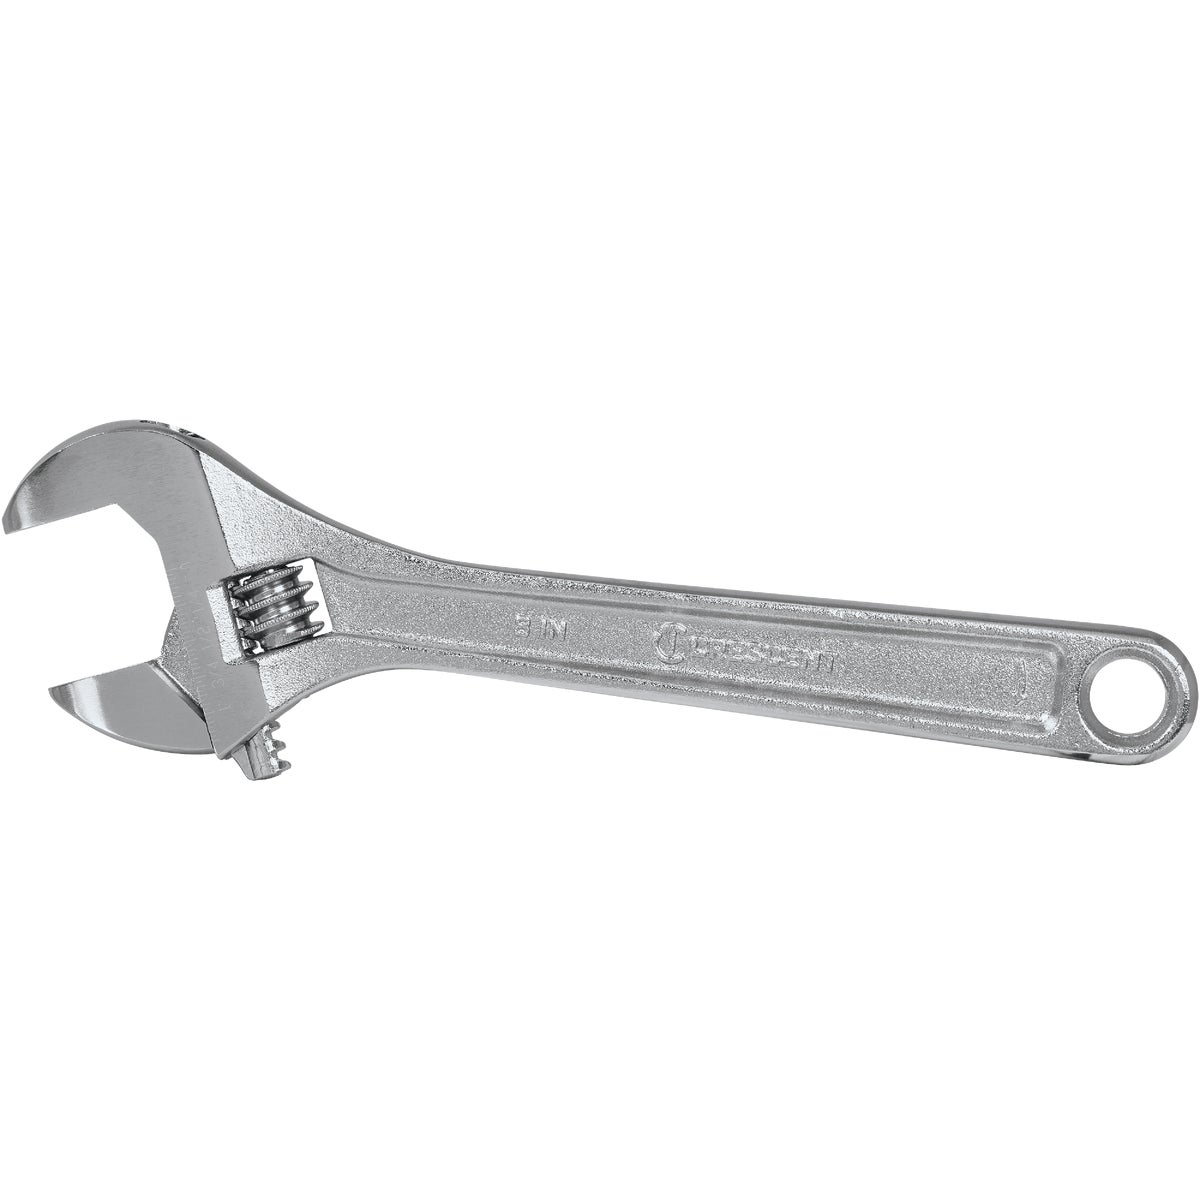 Crescent 8 In. Adjustable Wrench